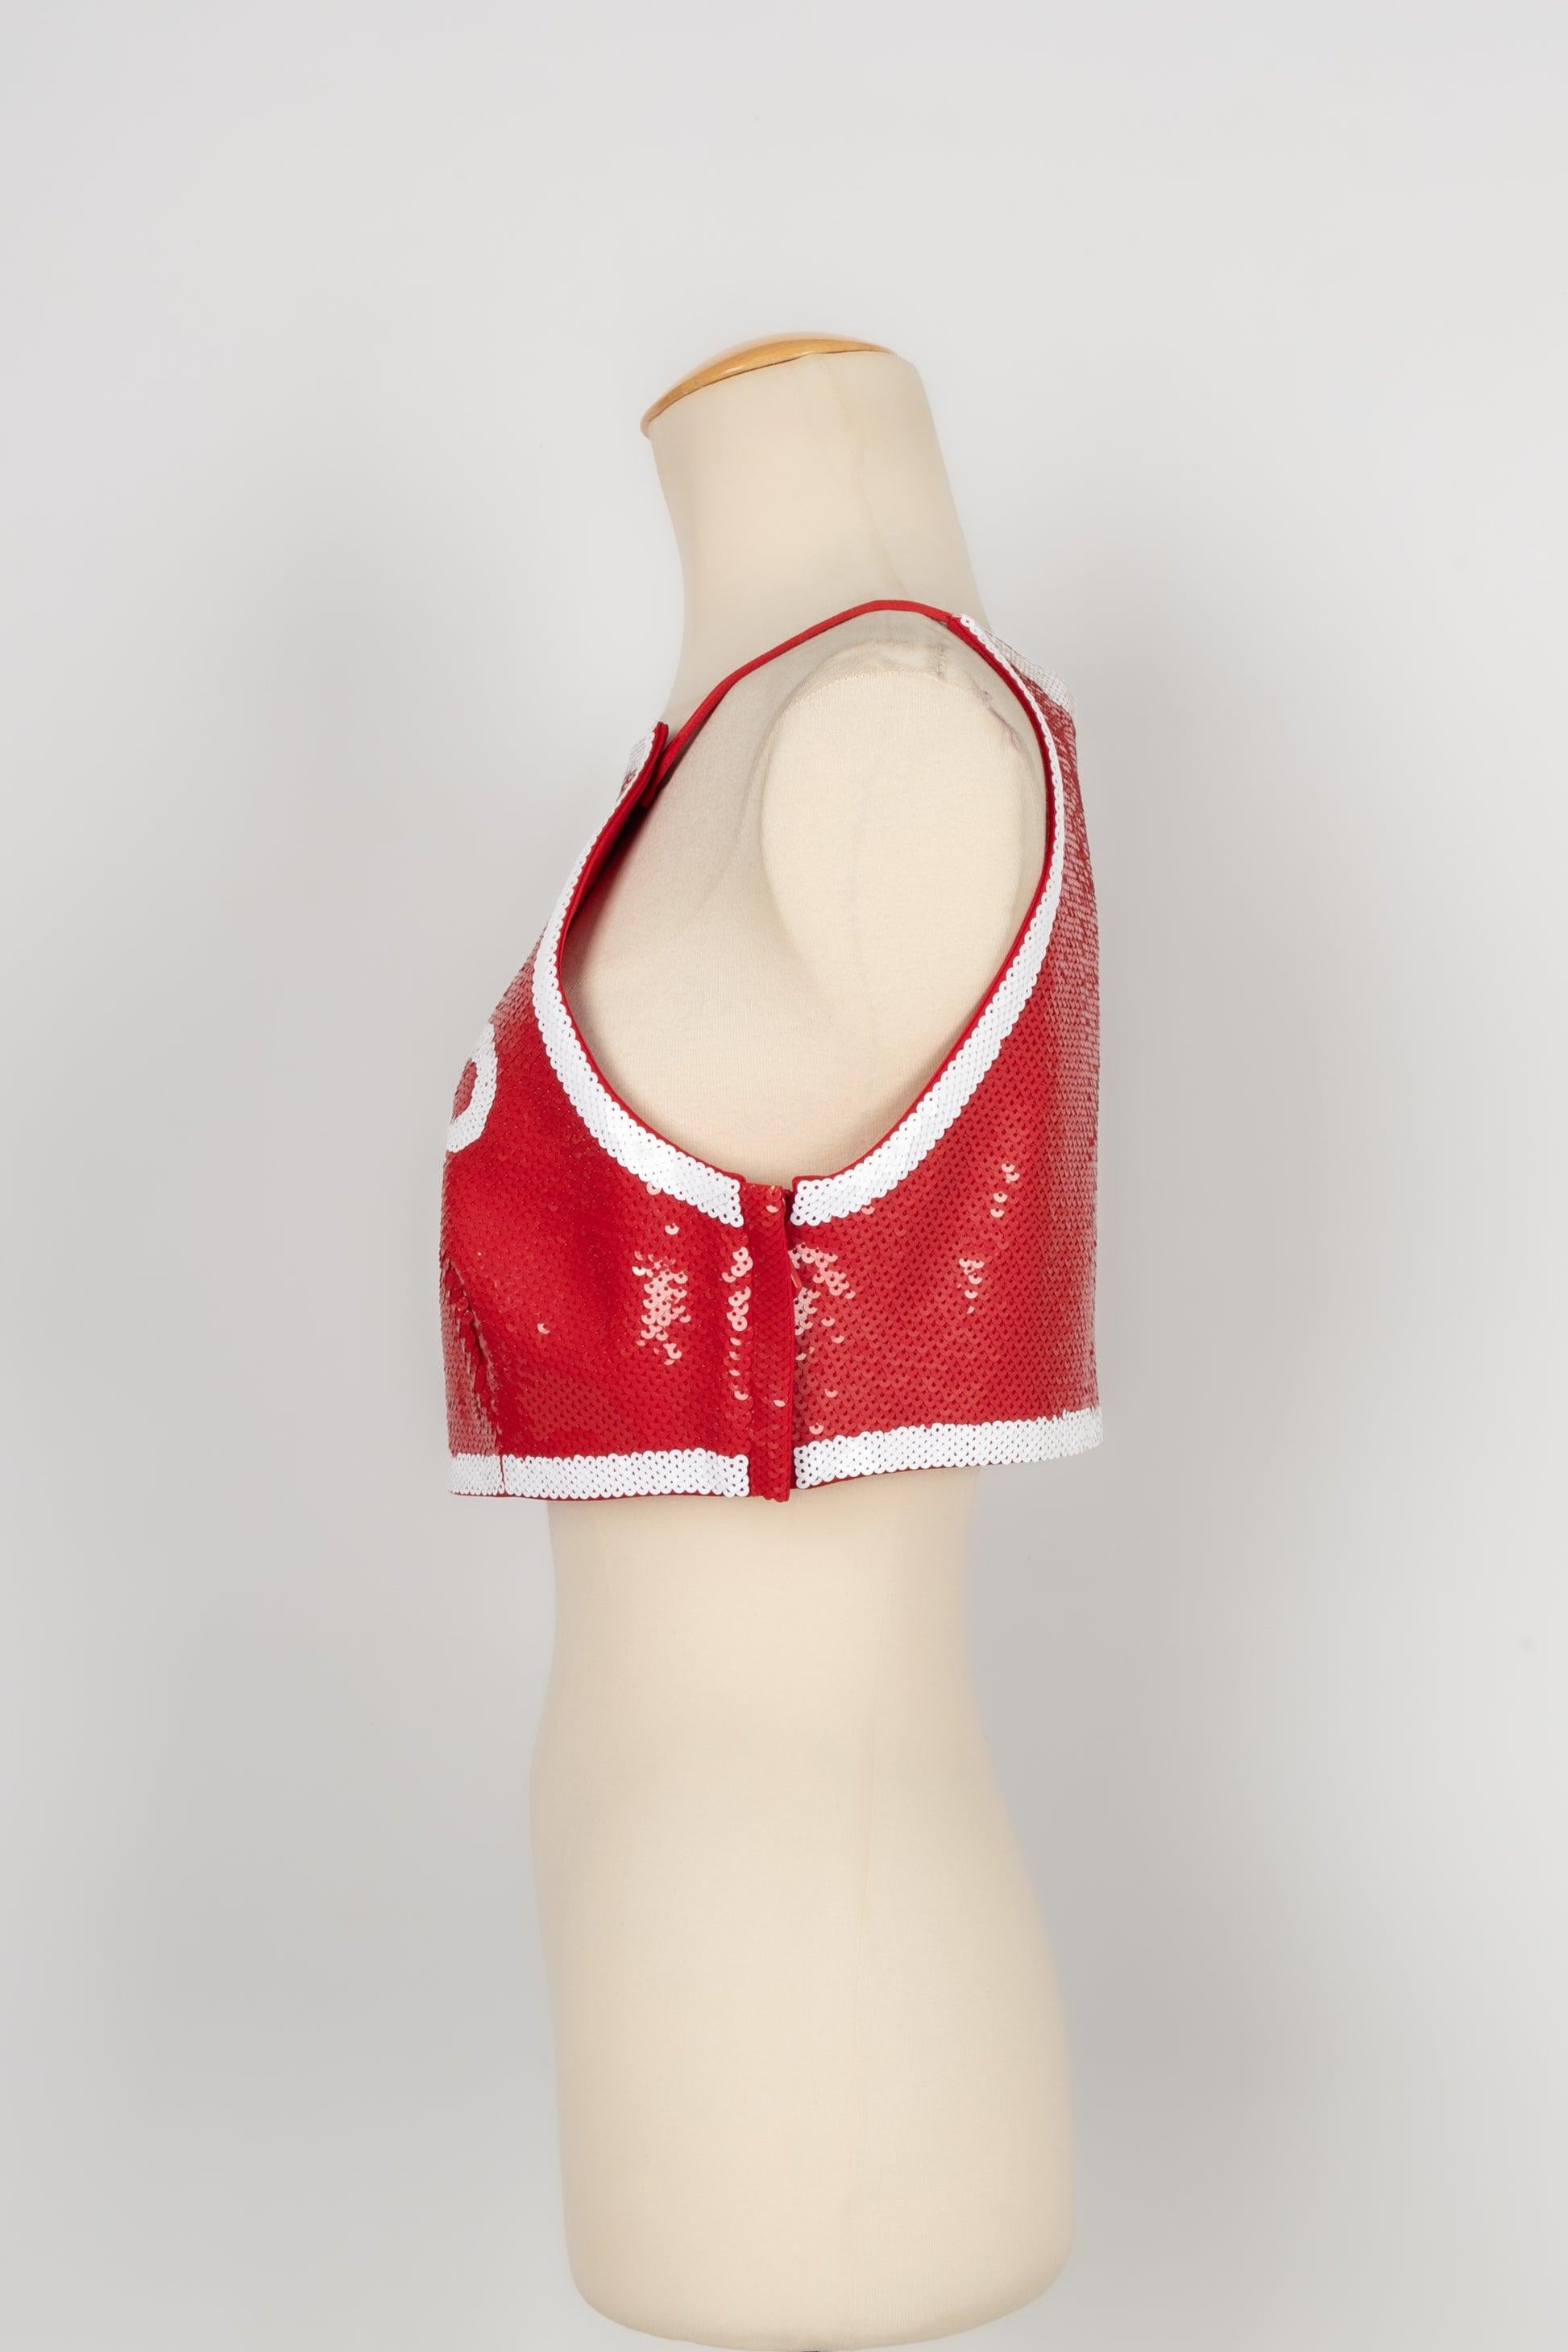 Moschino - (Made in Italy) Red and white sequinned top. Size 40FR. Spring-Summer 2016 Ready-to-Wear Collection.

Additional information:
Condition: Very good condition
Dimensions: Chest: 43 cm
Length: 37 cm

Seller reference: FH197